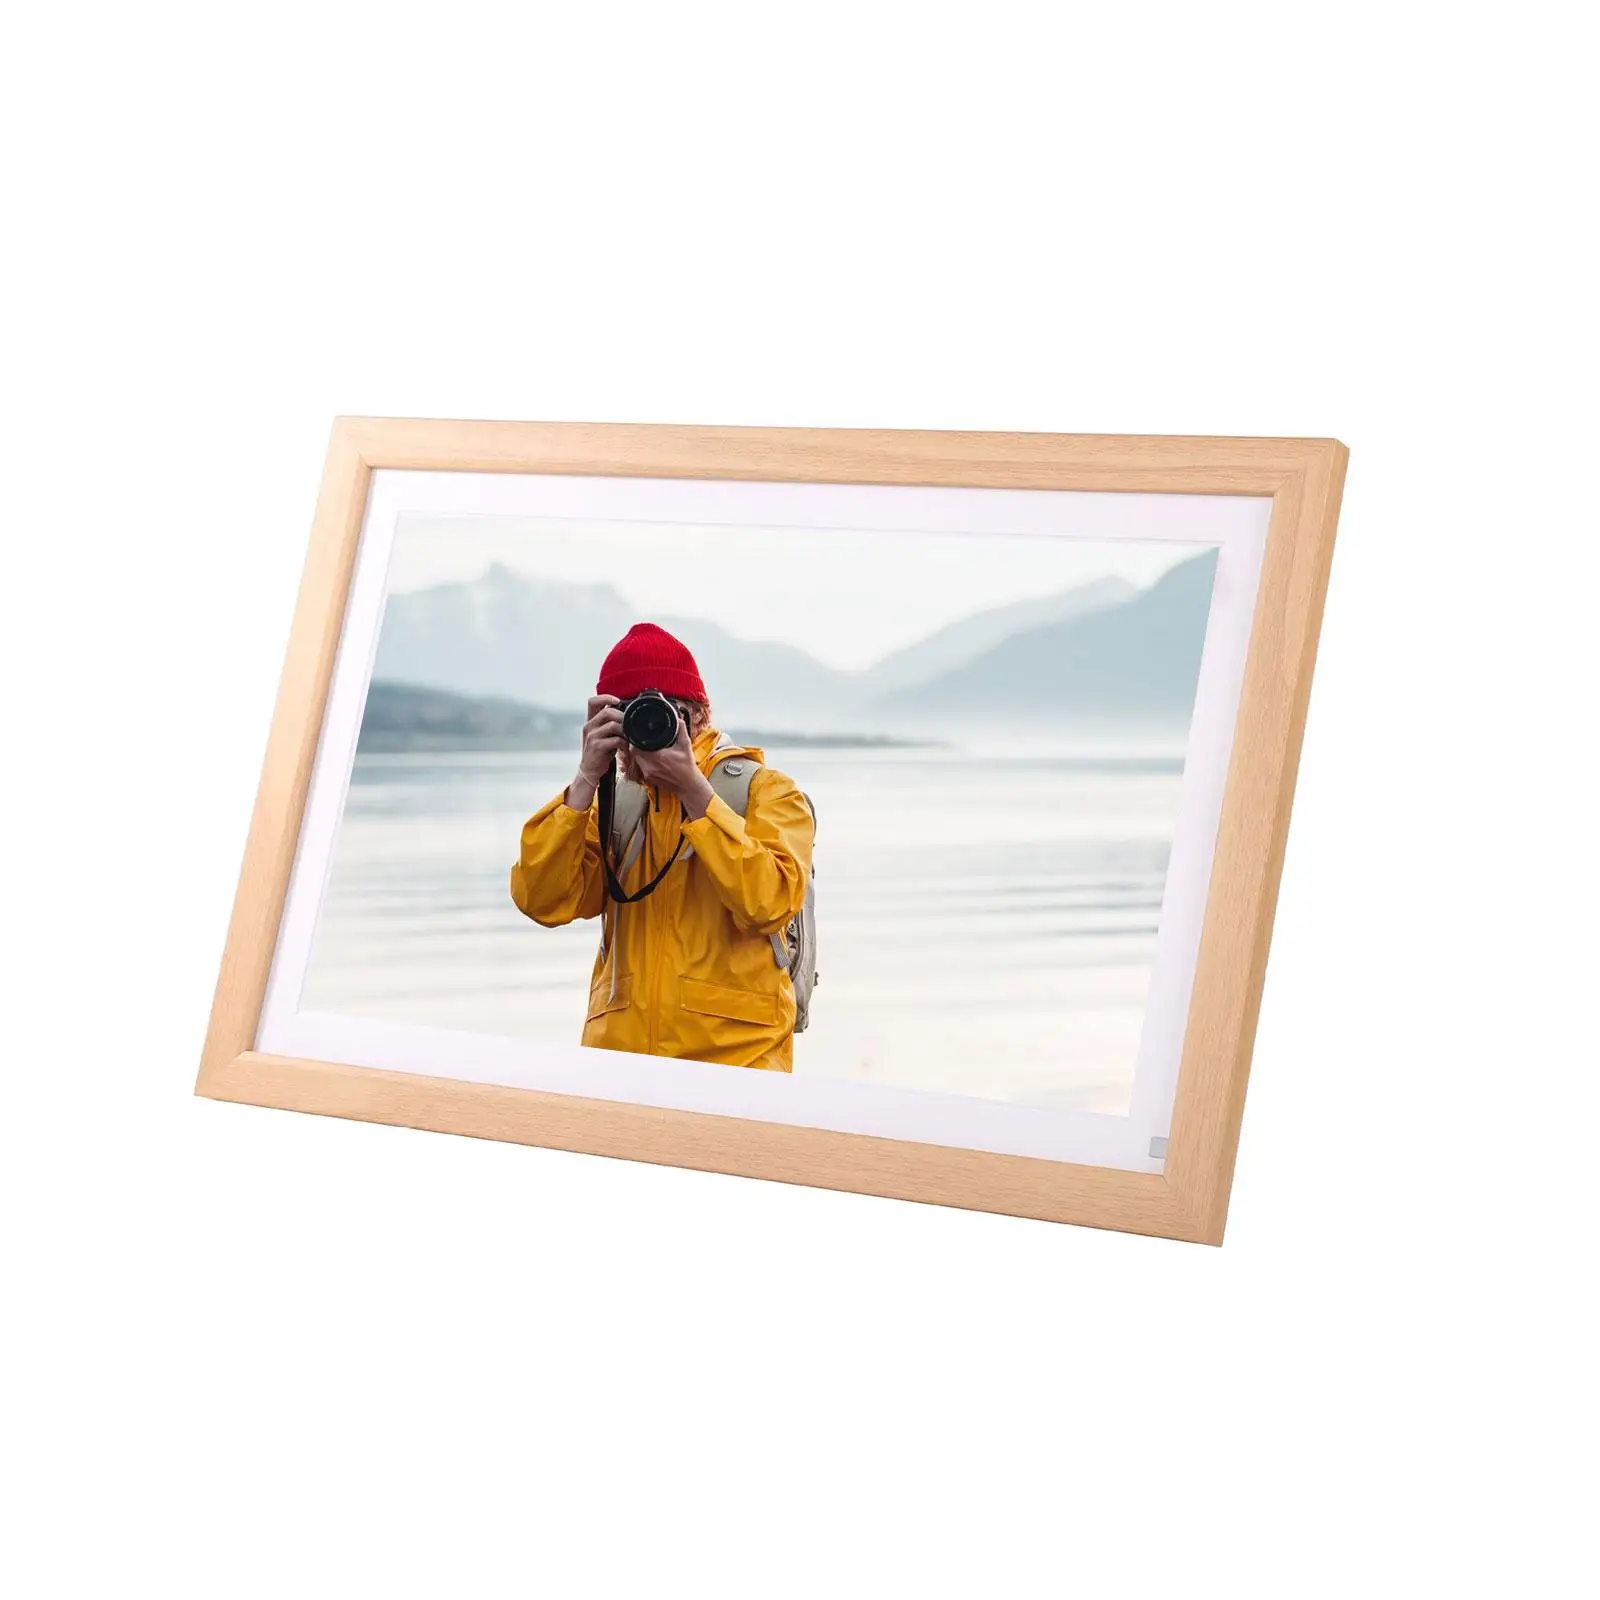 1920x1080 IPS Touch Screen Photo Frame Share Photos or Videos with 32GB Storage Storage Digital Picture Frame for Birthday Gifts